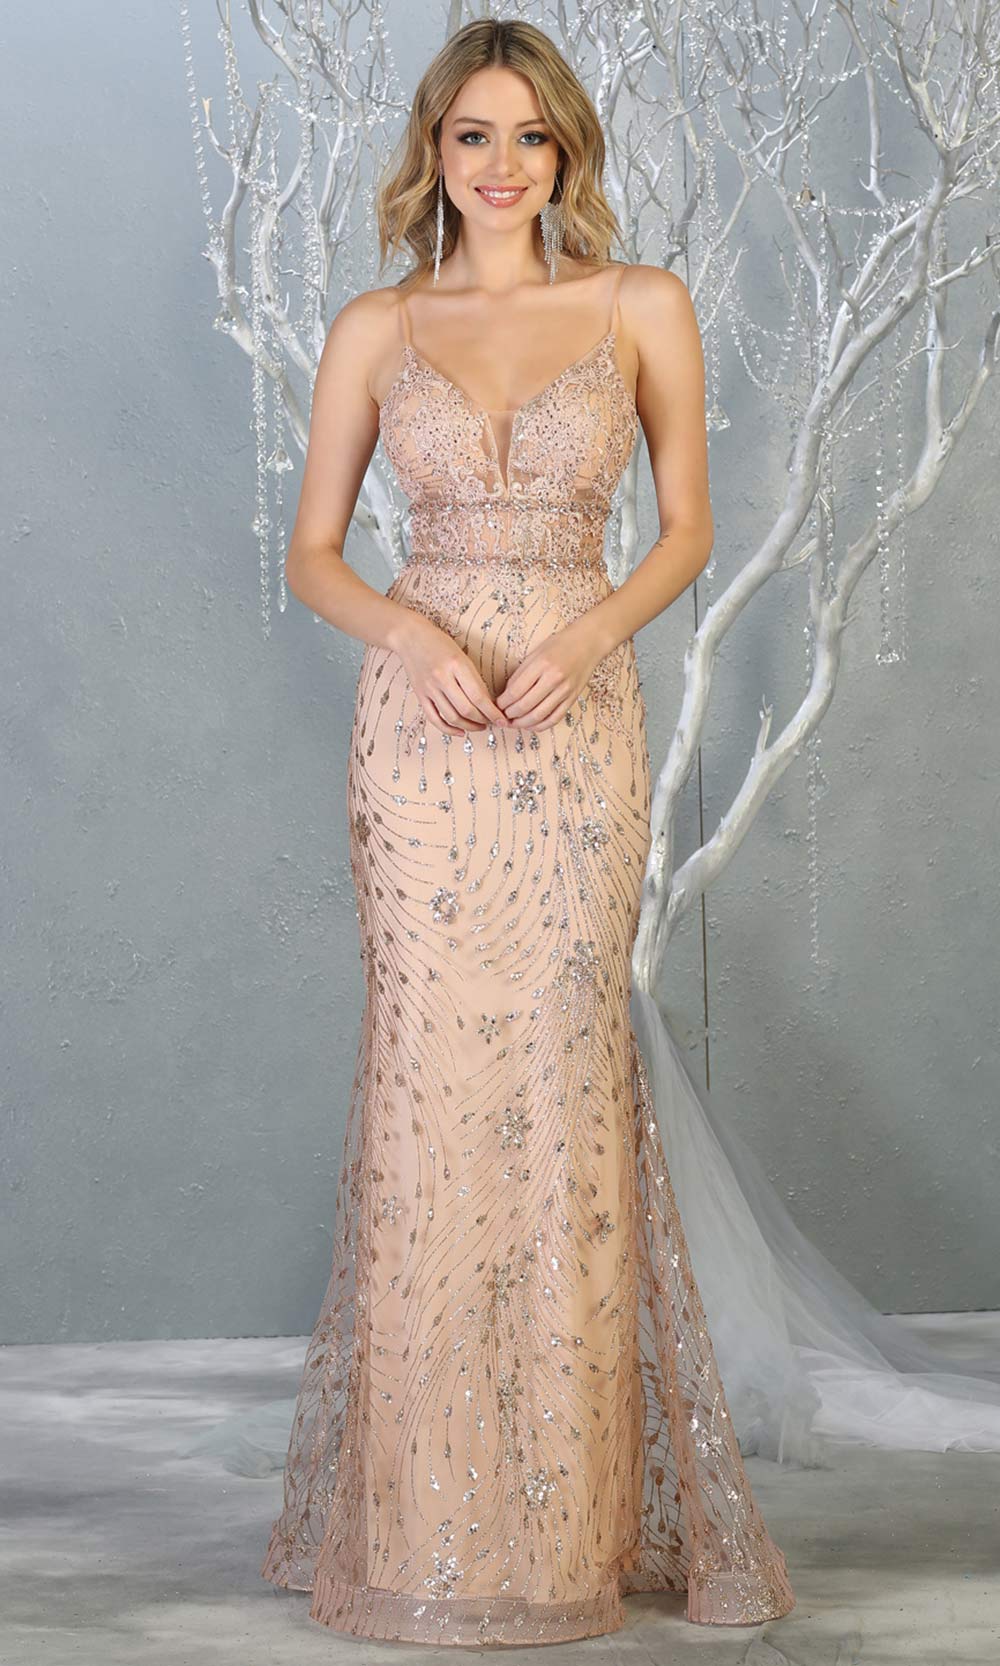 Mayqueen RQ7808 long rose gold v neck sexy fitted sequin lace dress w/straps. Full length rose gold gown is perfect for  enagagement/e-shoot dress, formal wedding guest, indowestern gown, evening party dress, prom, bridesmaid. Plus sizes avail.jpg